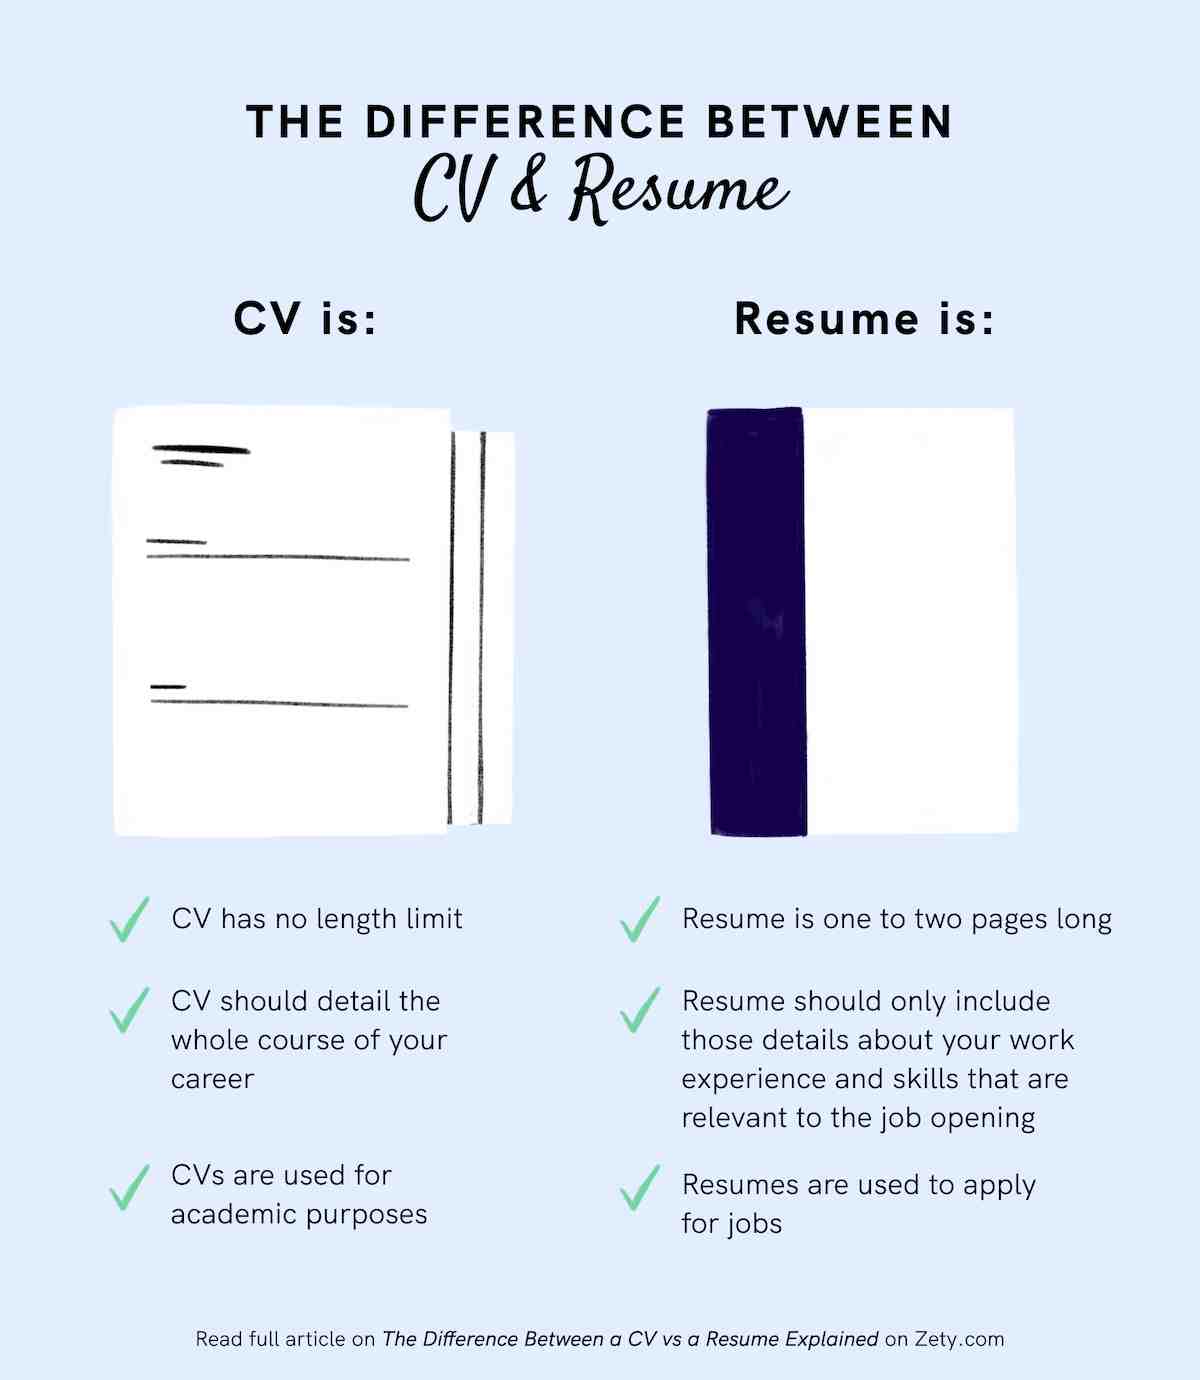 The difference between a CV and a resume